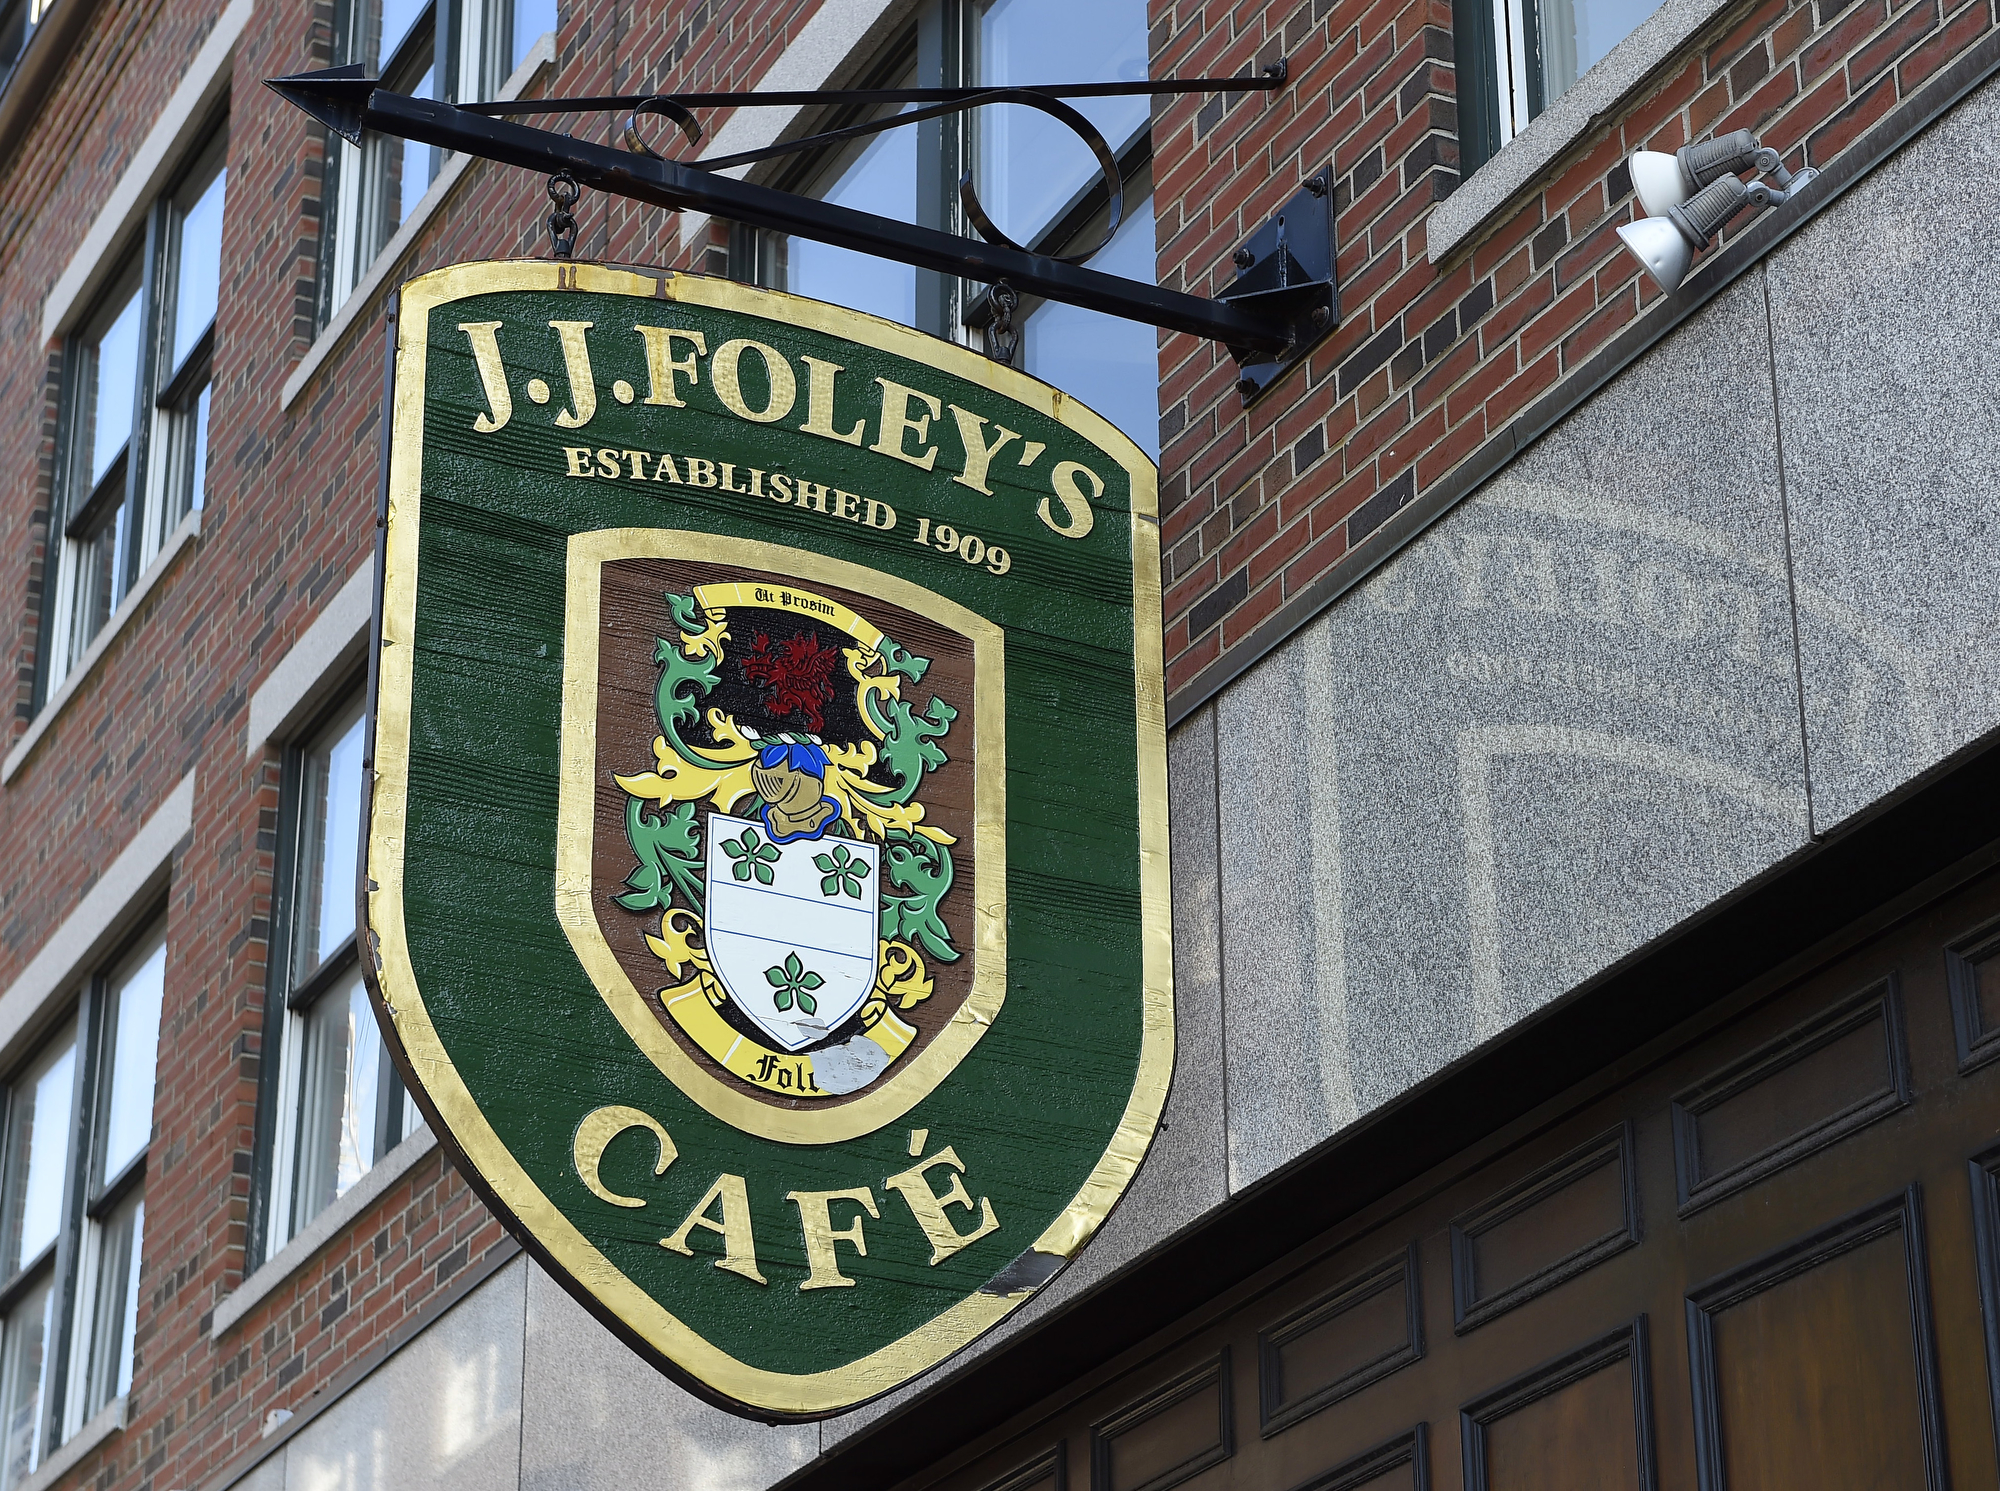 A green and gold restaurant sign hanging off the side of a building with a coat of arms pictured and “J.J. Foley’s Cafe” written on the side.